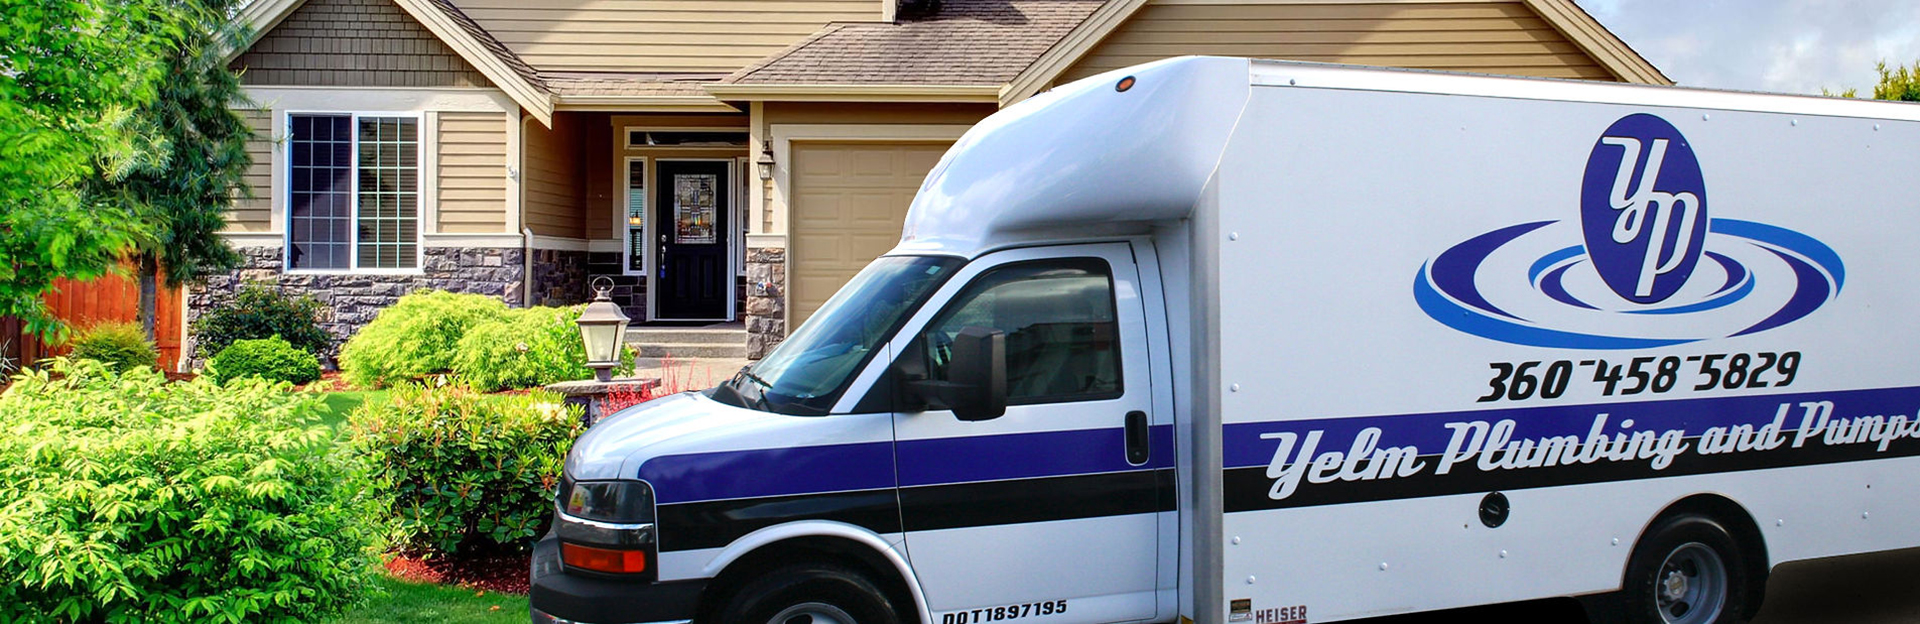 Yelm Plumbing and Pumps work truck outside a home